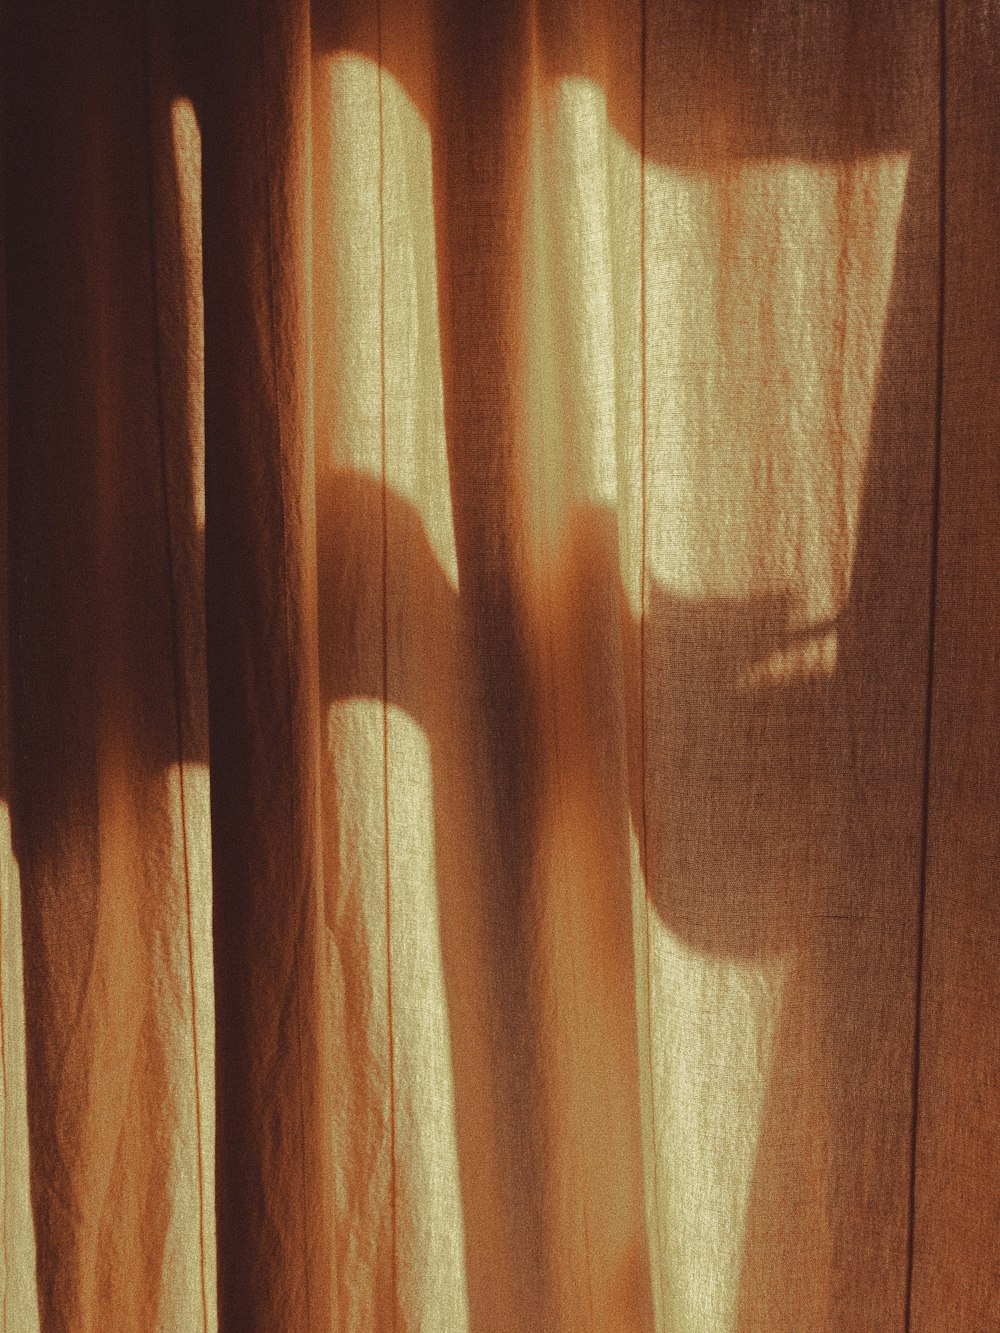 a shadow of a person's hand on a curtain